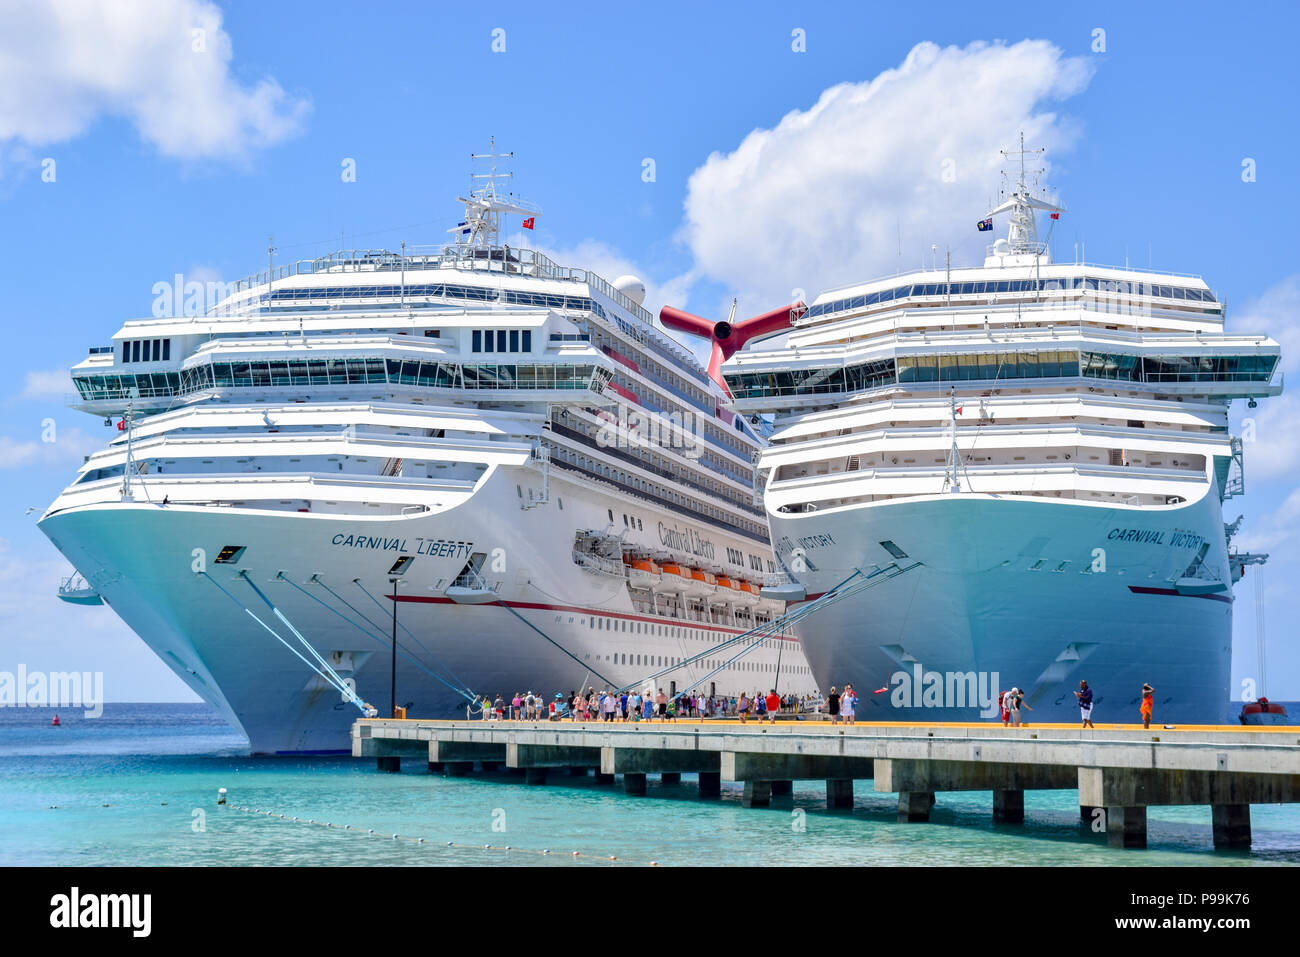 Grand Turk, Turks and Caicos Islands - April 03 2014: Carnival Liberty and Carnival Victory Cruise Ships moored side by side. Stock Photo